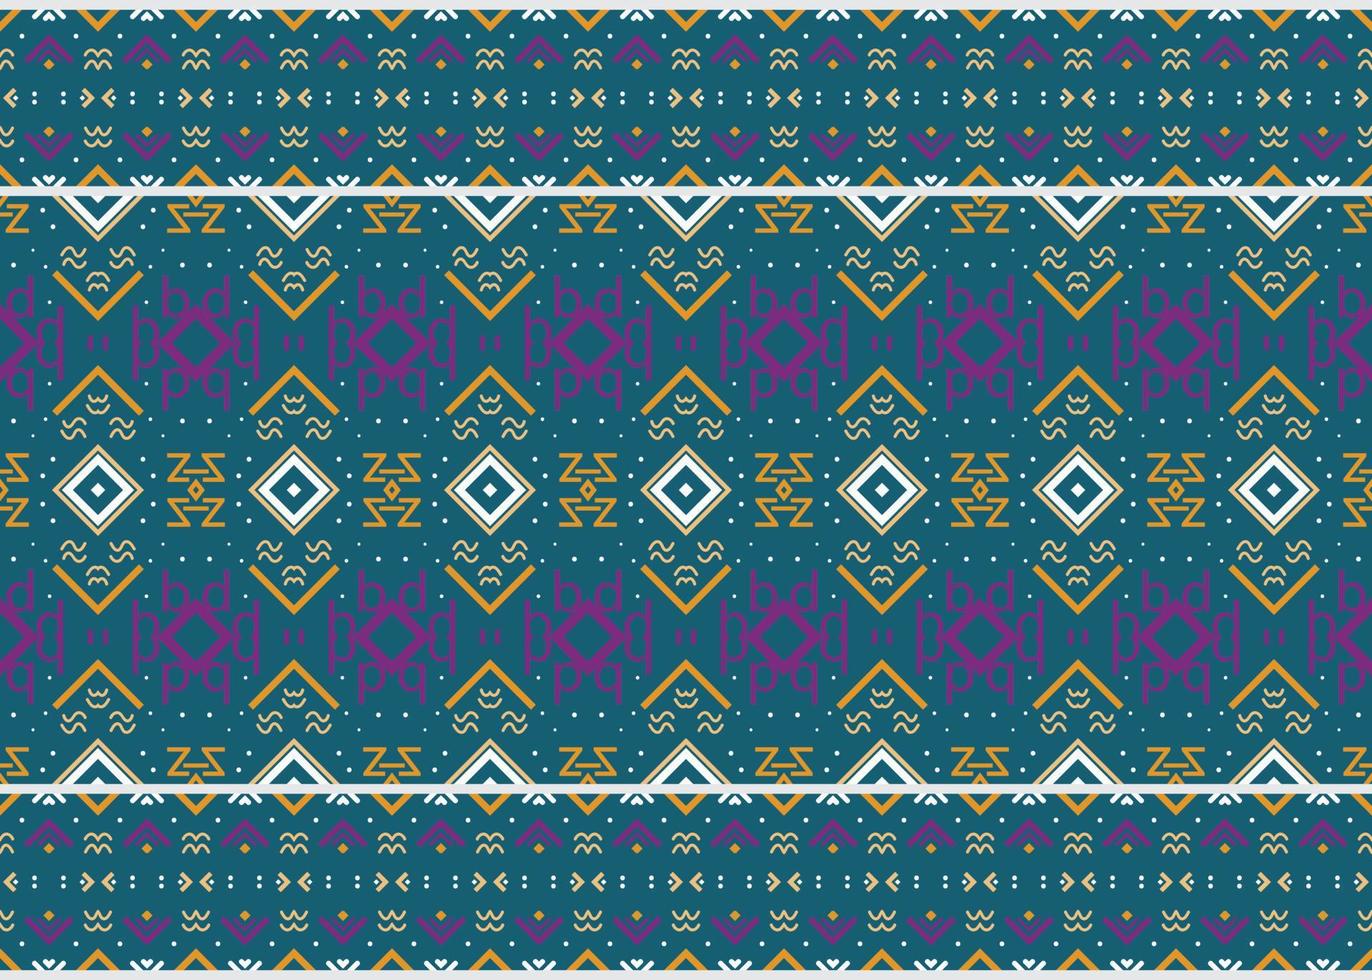 Ethnic flowers tribal cross Geometric Traditional ethnic oriental design for the background. Folk embroidery, Indian, Scandinavian, Gypsy, Mexican, African rug, carpet. vector